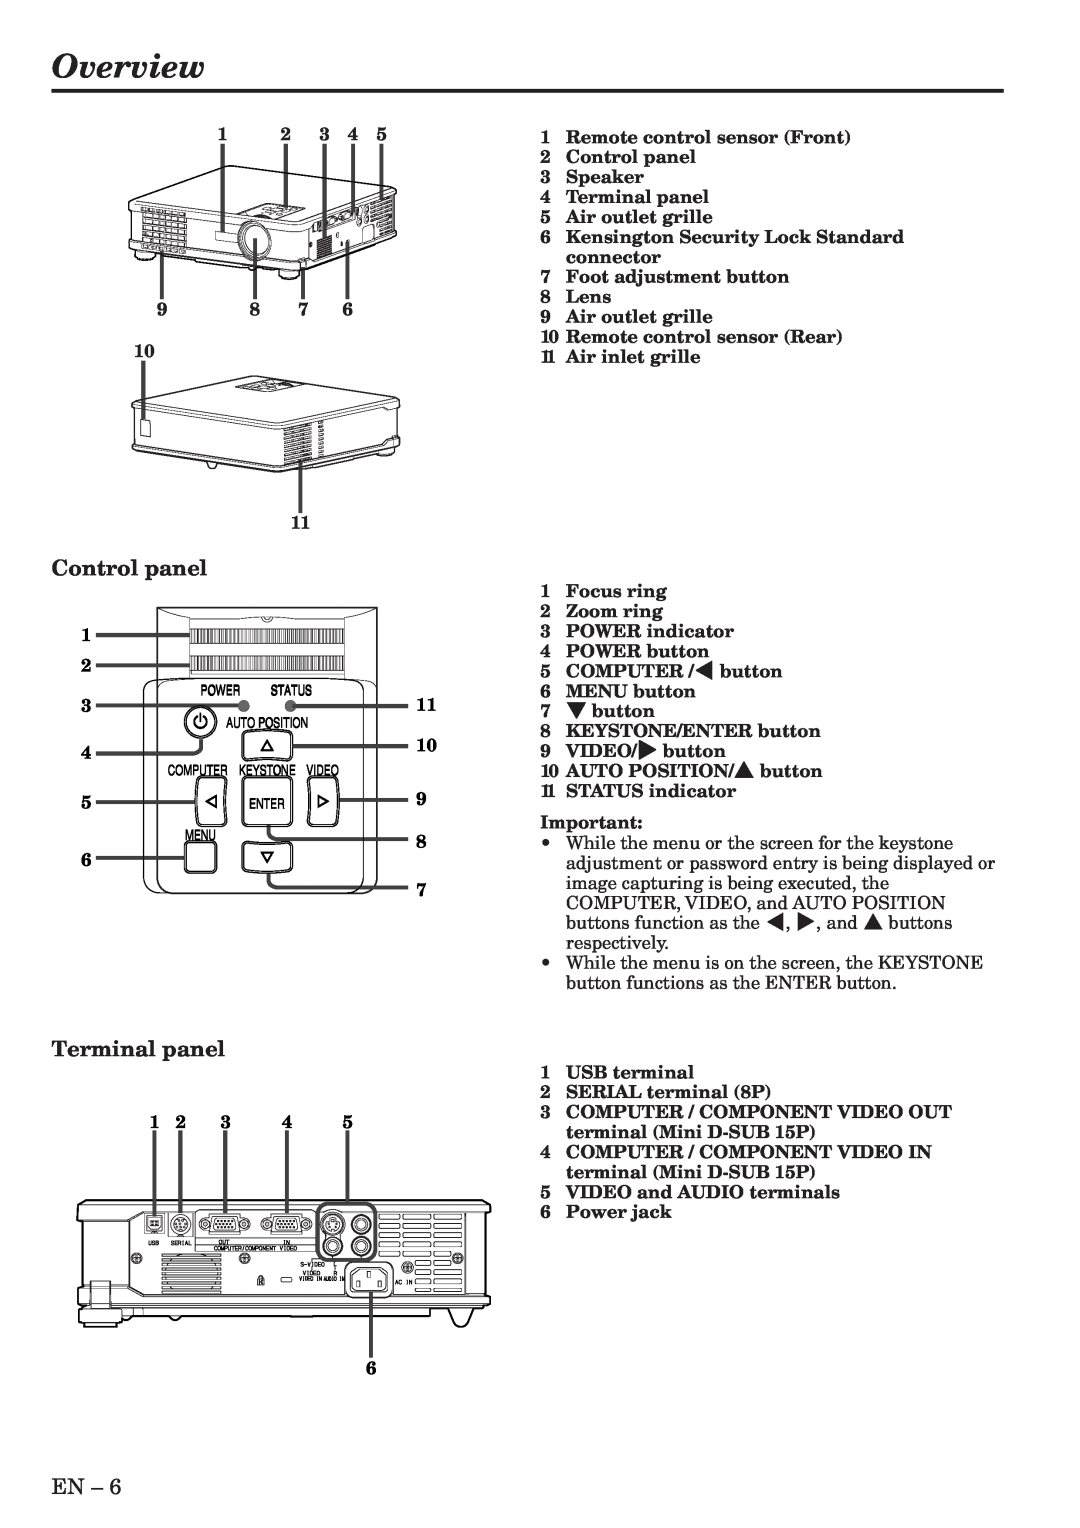 Mitsubishi Electronics XL5U user manual Overview, Control panel, 1 2 3 4 9 8 7, Terminal panel 5 Air outlet grille 